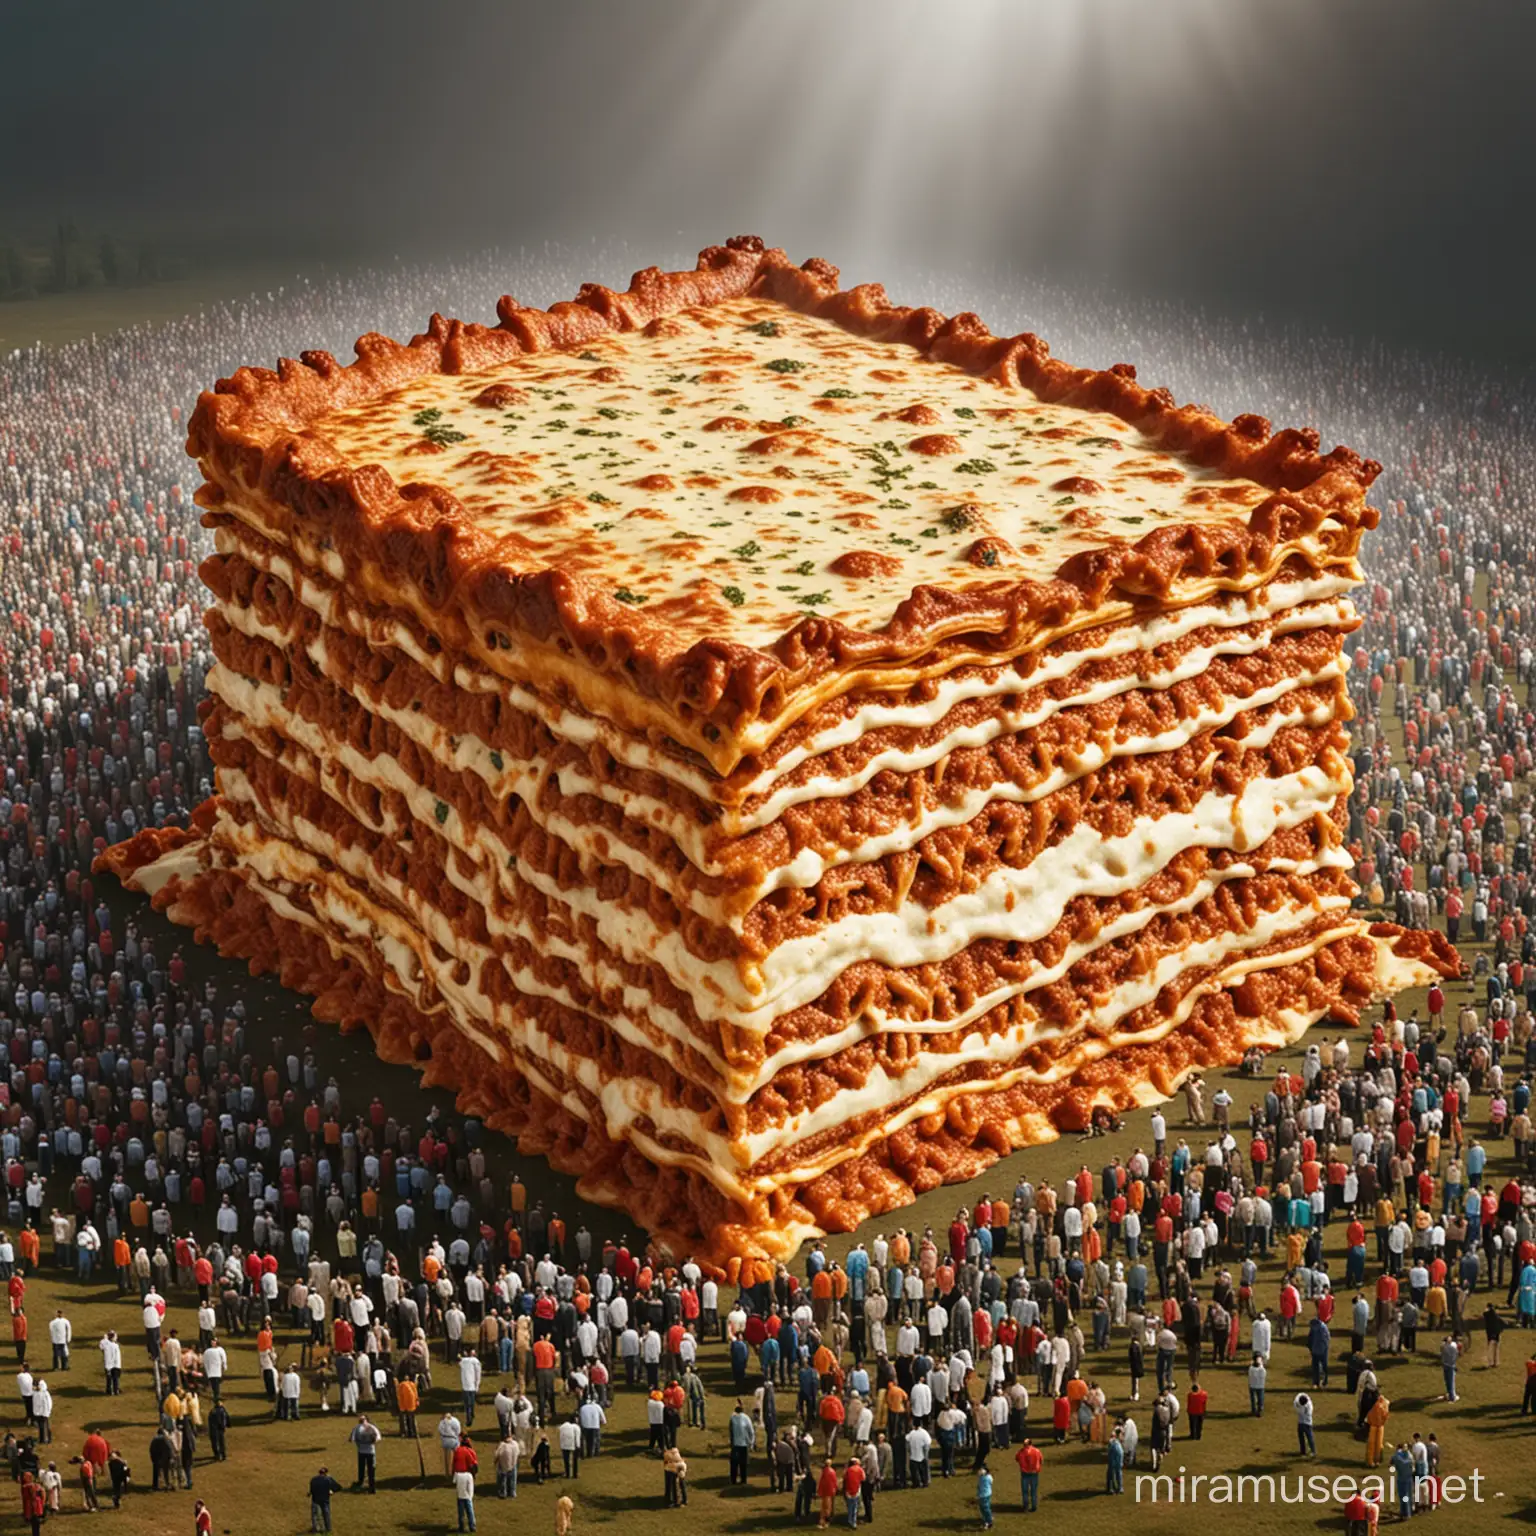 People Reverently Adoring a Sentient Giant Lasagna